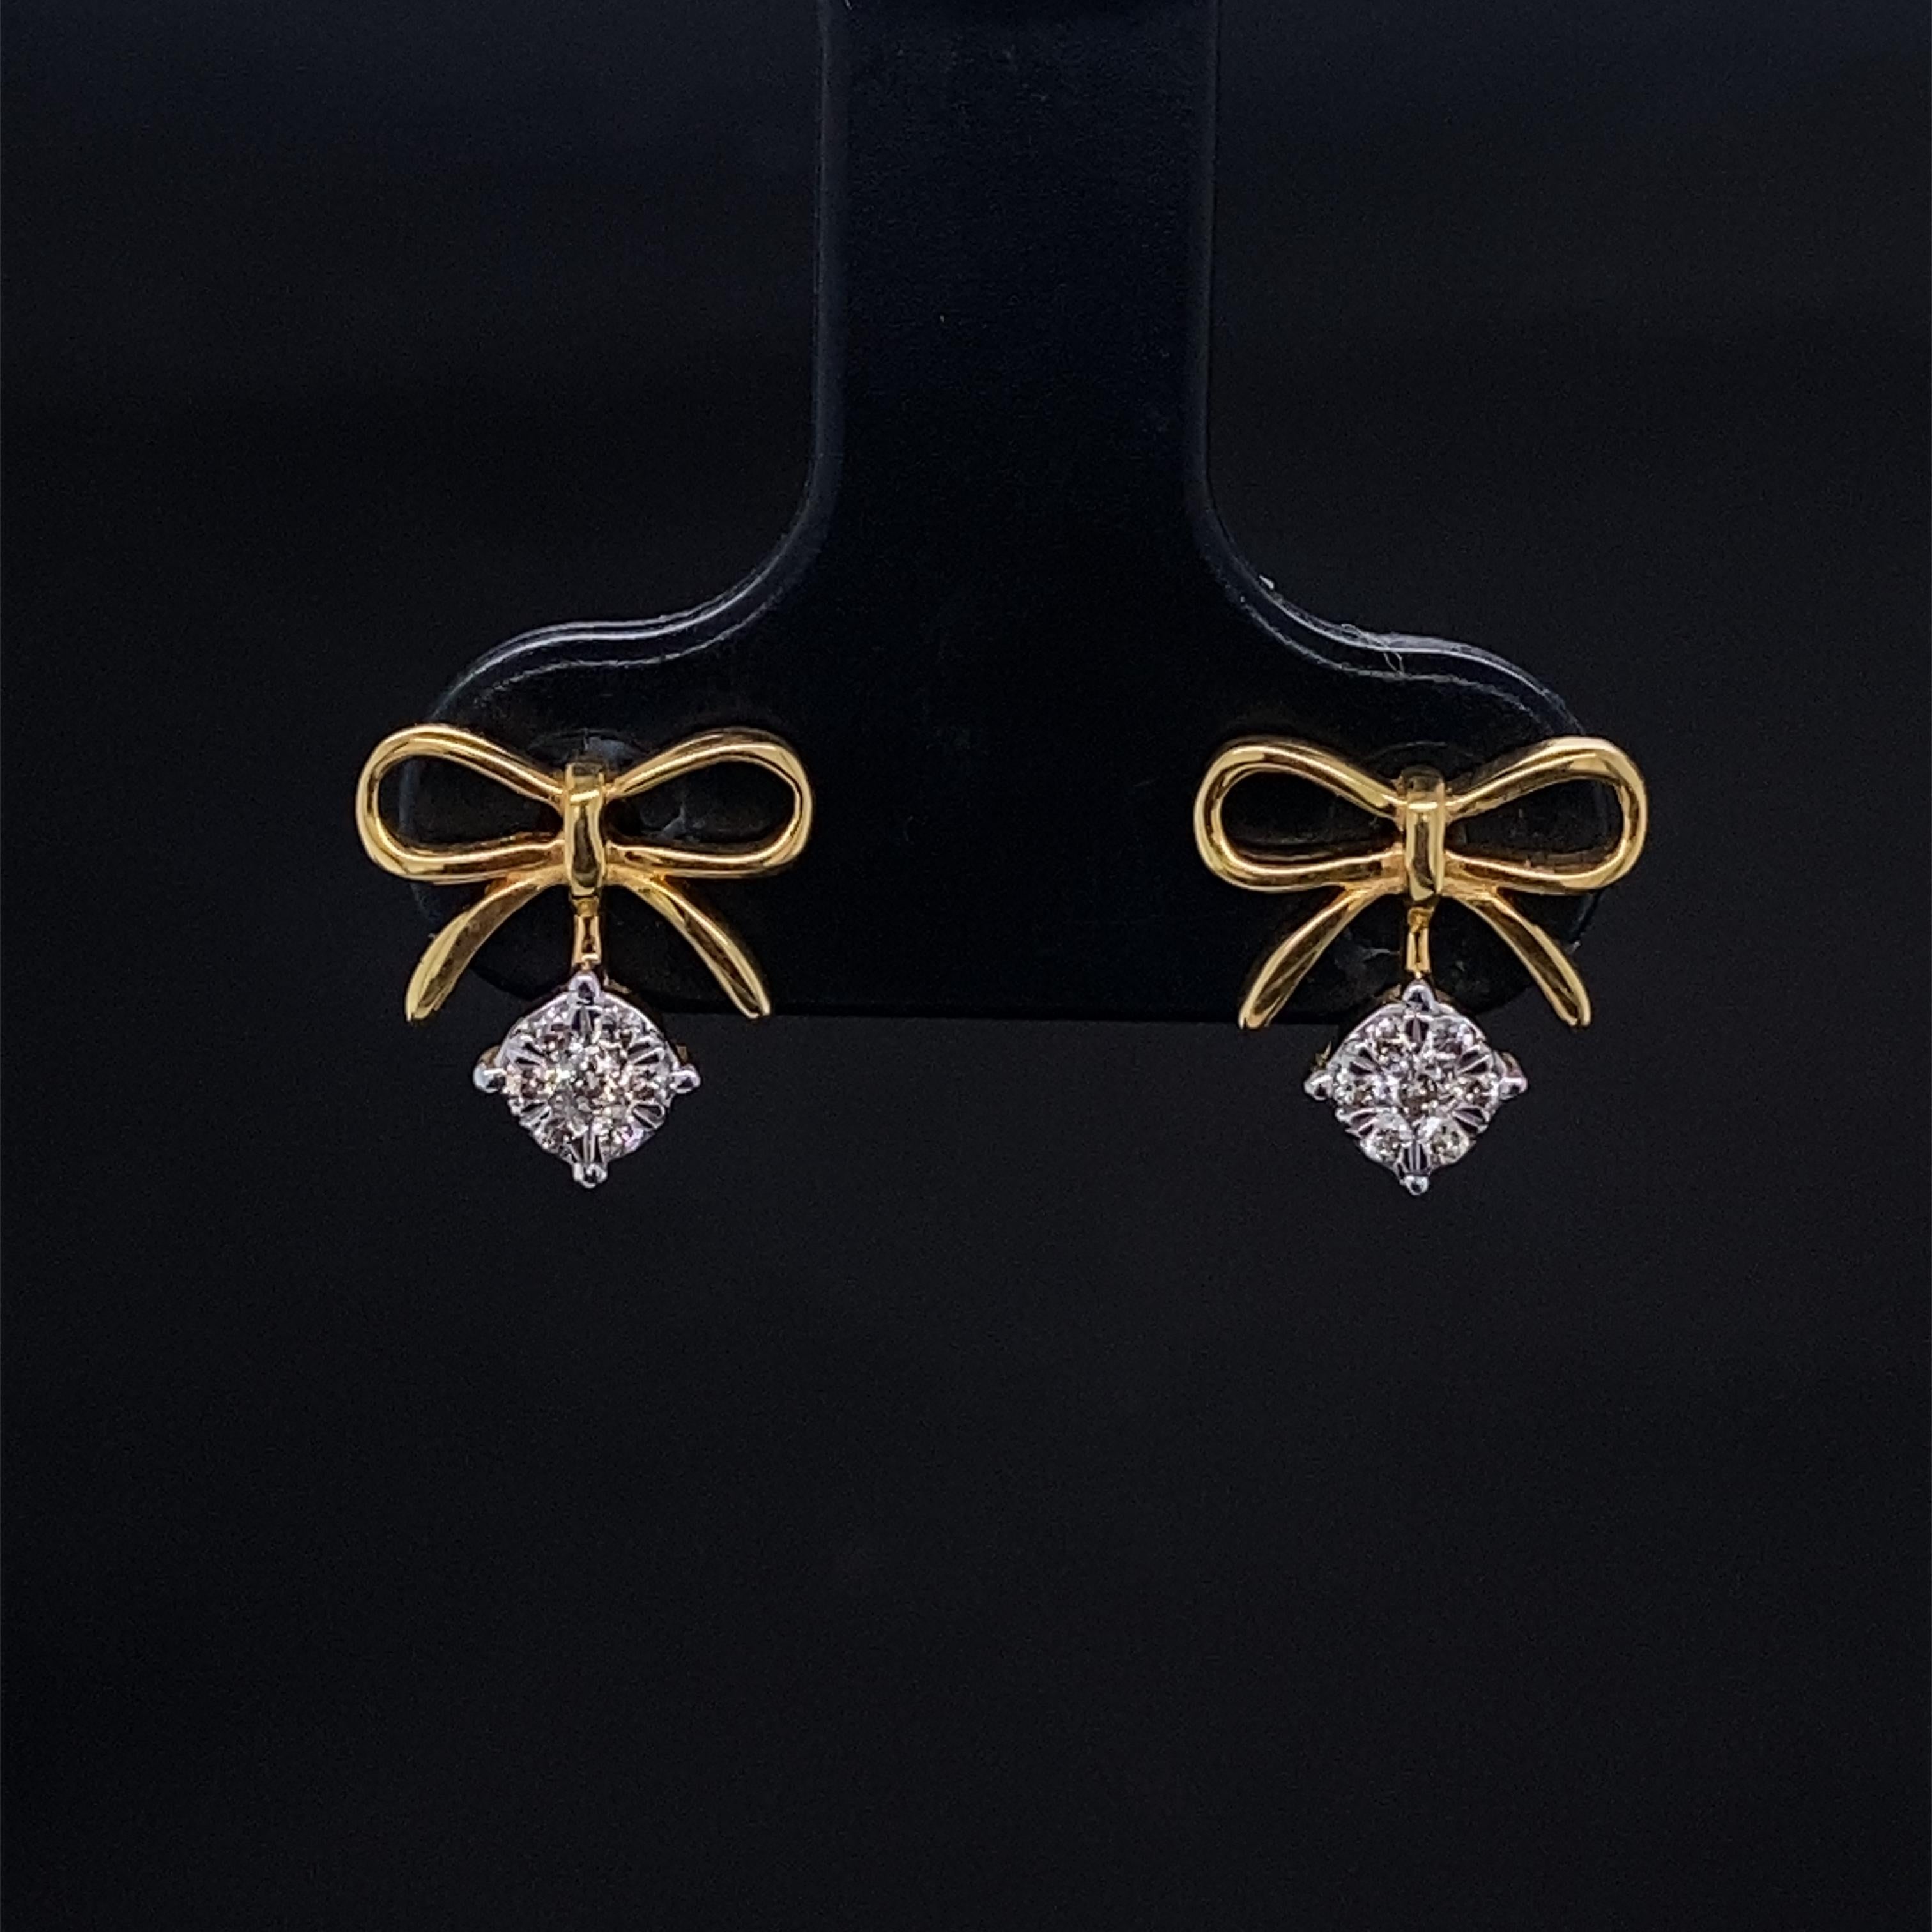 Bow Diamond Earrings for Girls (Kids/Toddlers) in 18K Solid Gold are charming and dainty jewelry pieces designed specifically for young children. These earrings feature a delicate bow design crafted from high-quality 18K solid gold, making them both